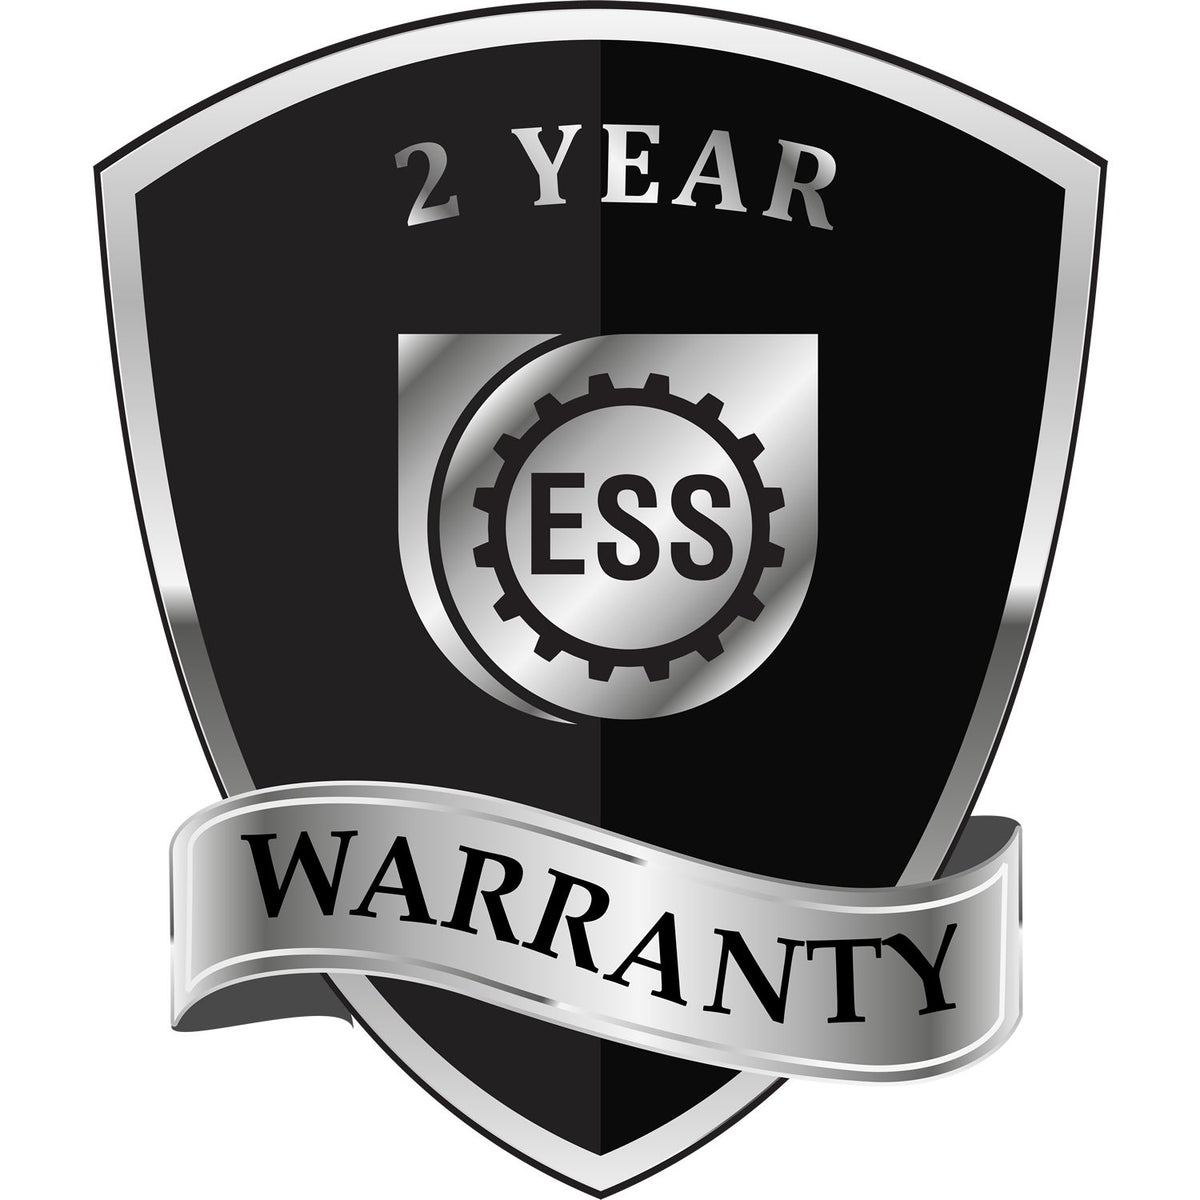 A black and silver badge or emblem showing warranty information for the Gift New York Architect Seal